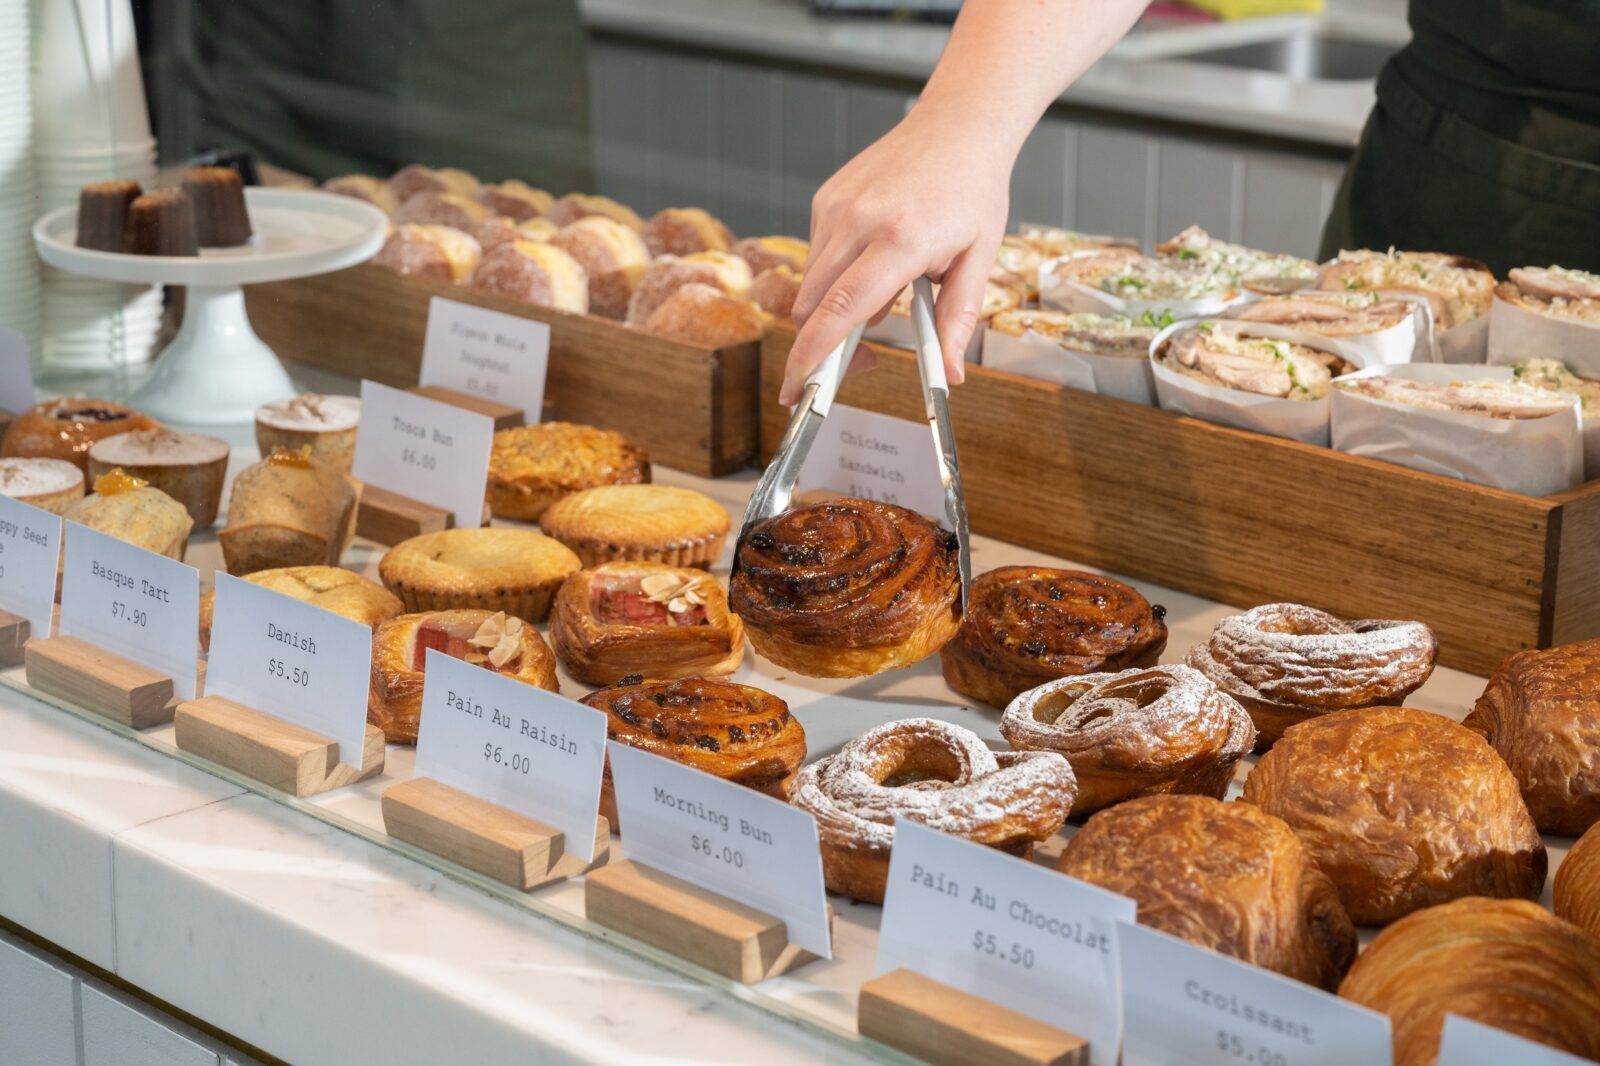 Shop cabinet bursting with cakes, pastries and sandwiches